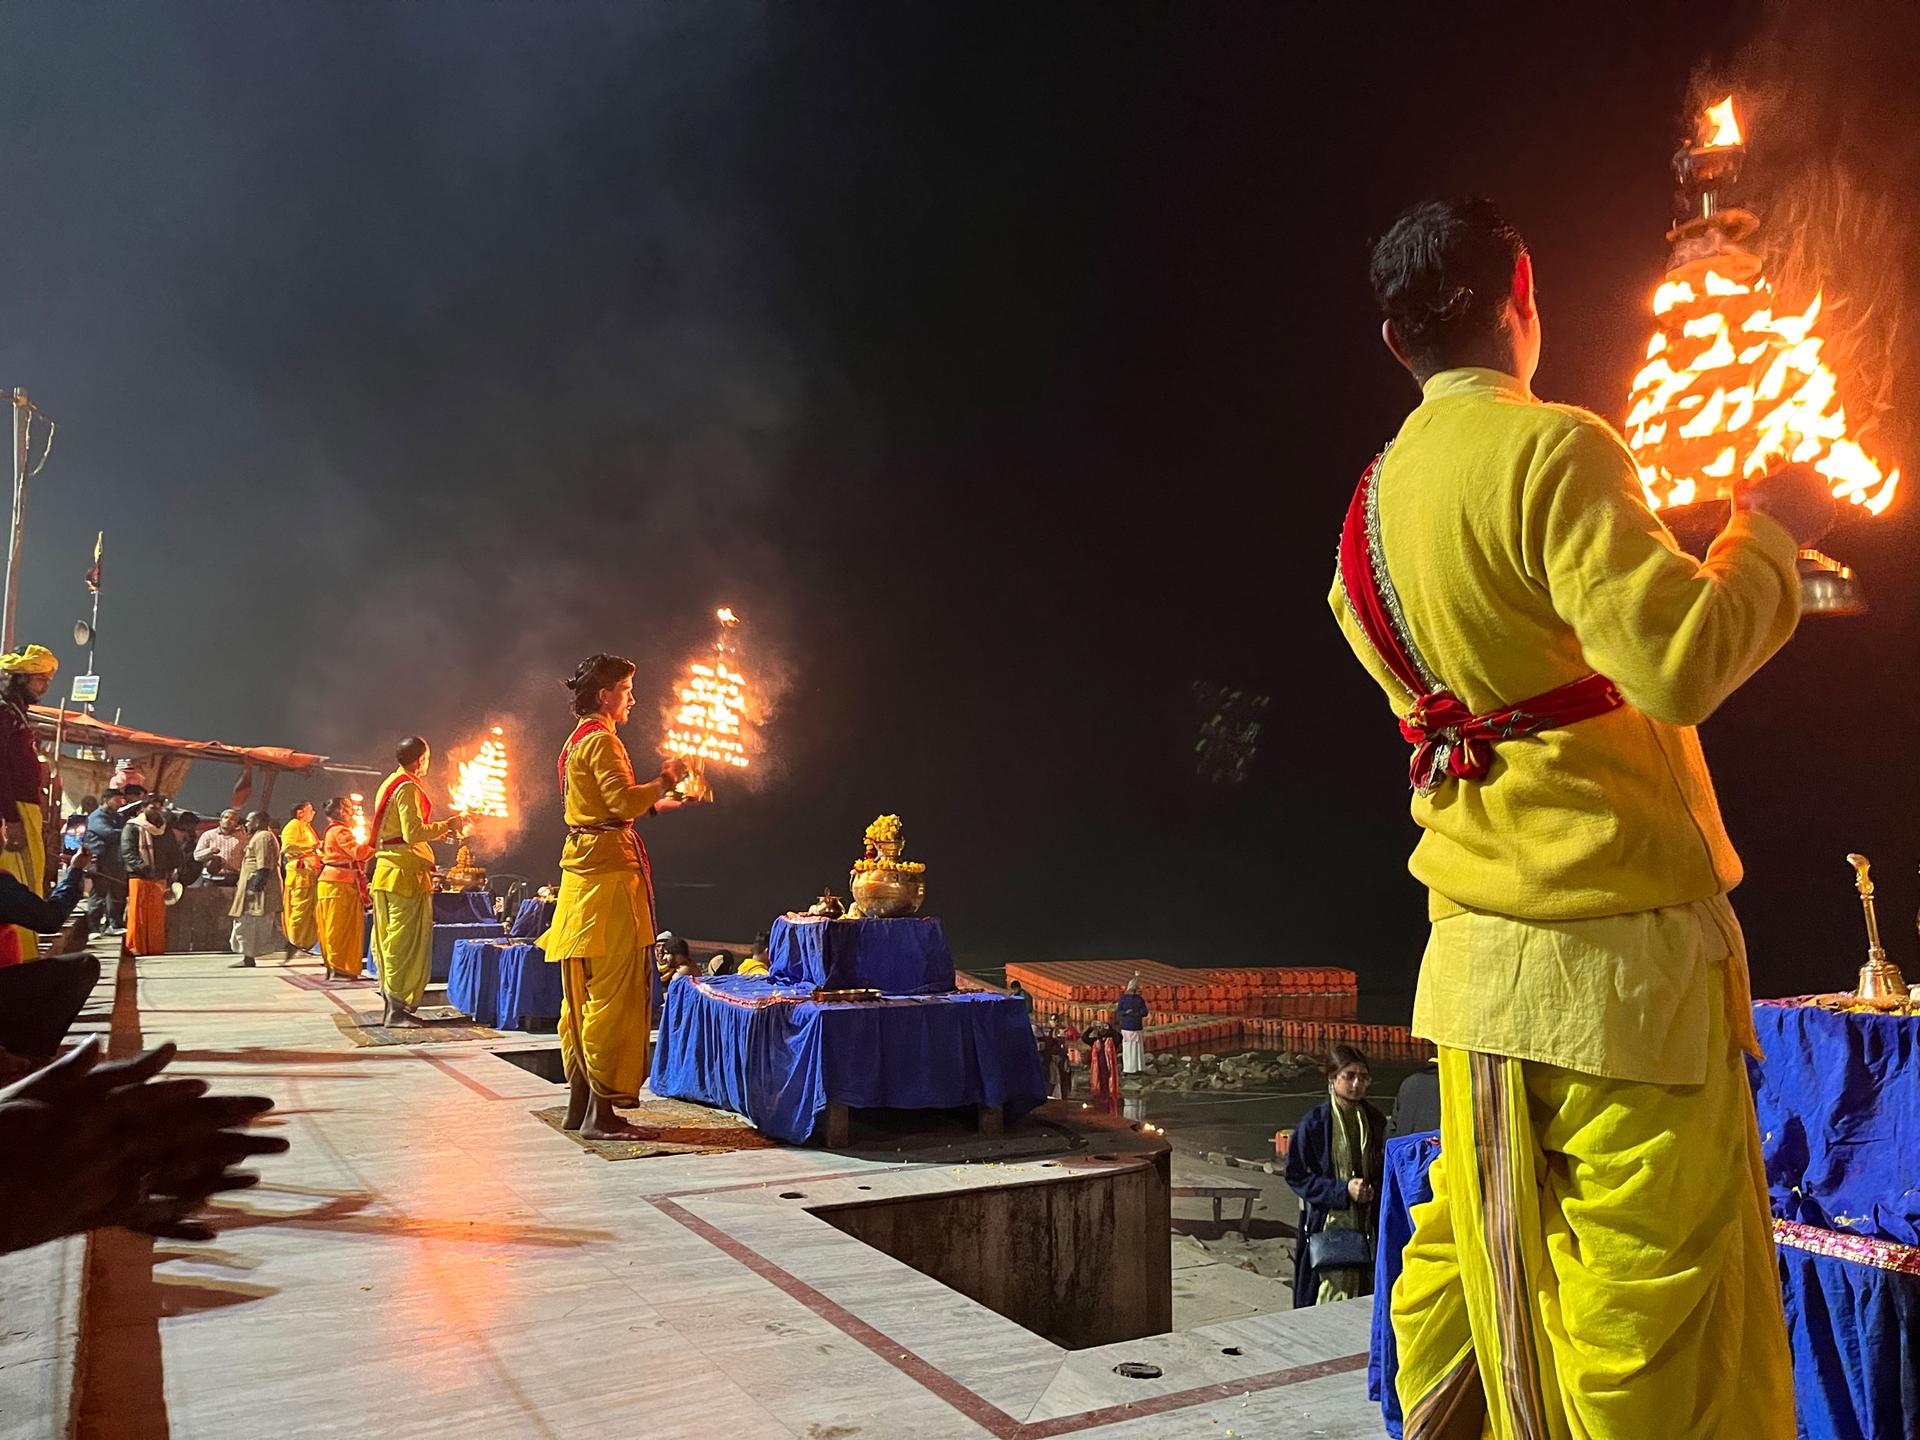 Hindu priests conduct evening prayers on the banks of the Saryu river in Ayodhya where a new Hindu temple has replaced a 16th-century mosque demolished by Hindu nationalists in 1992.